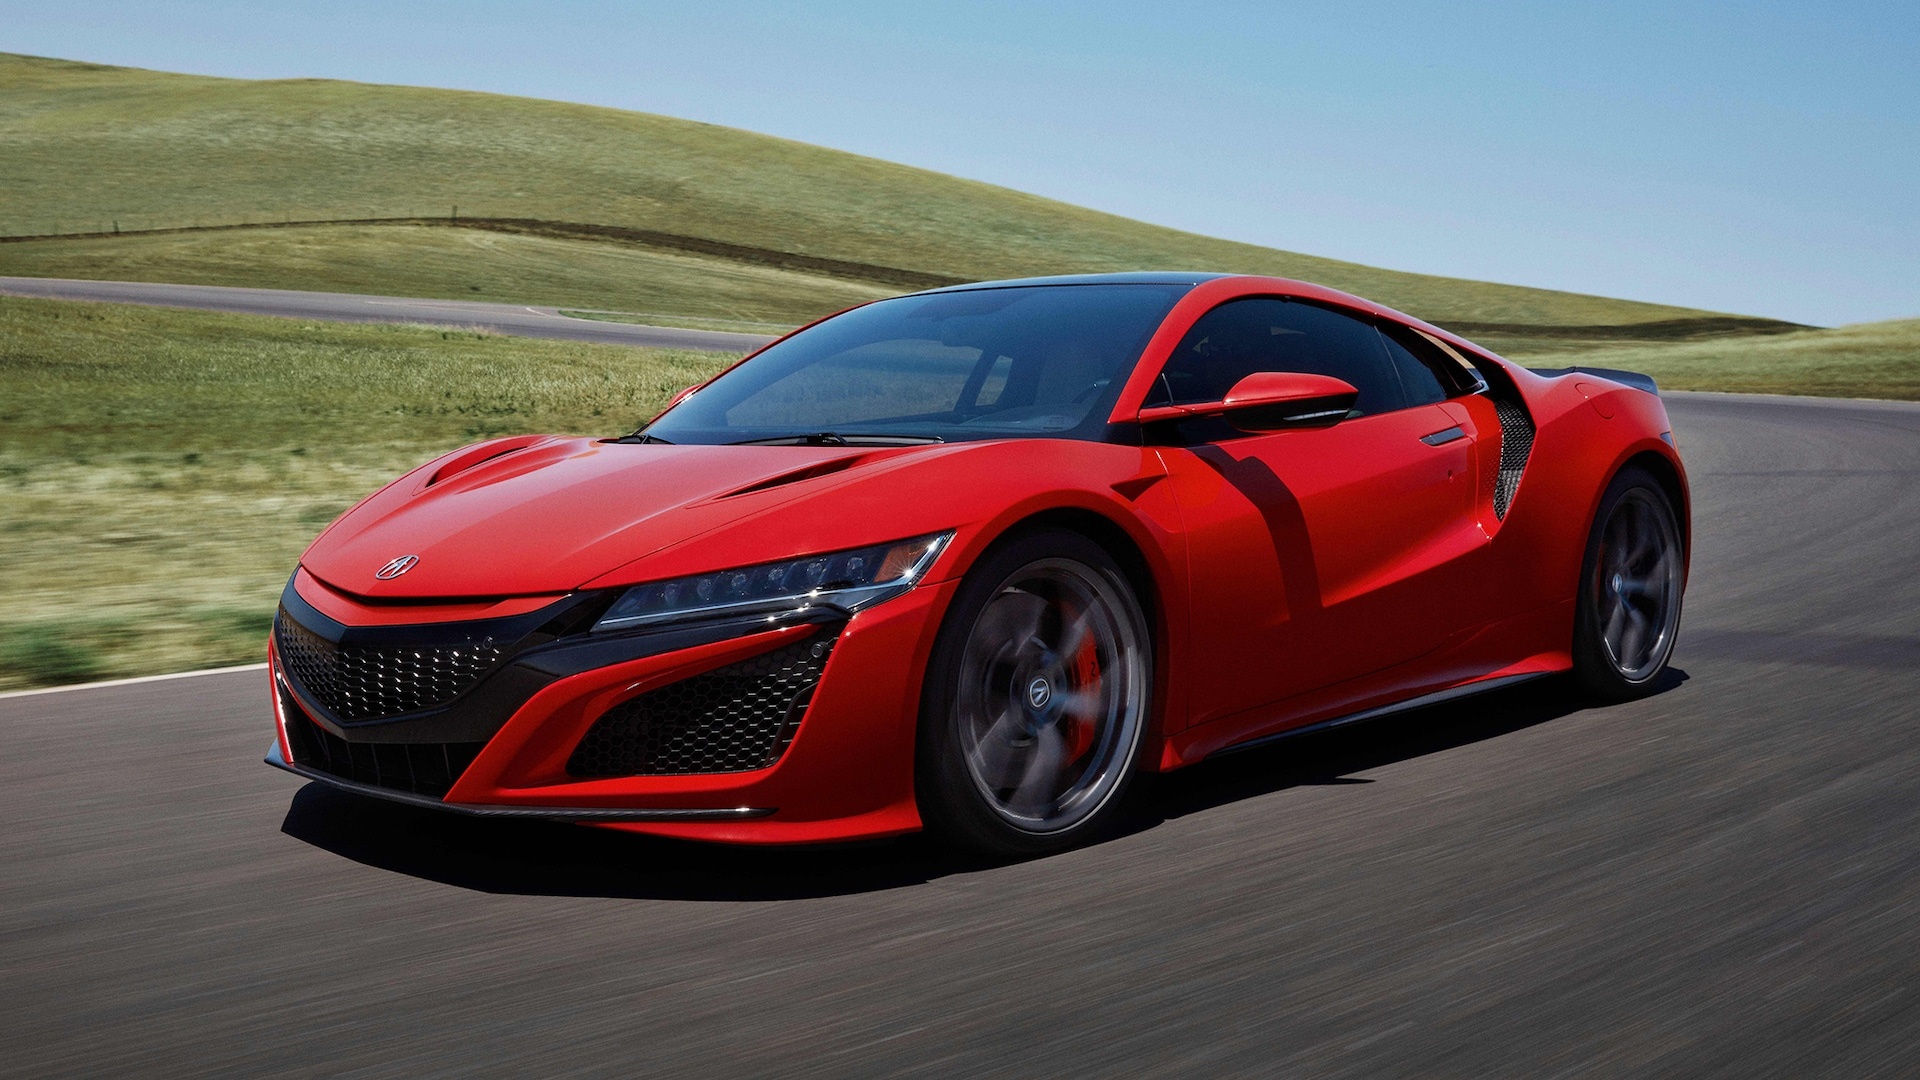 Acura NSX, Emotionally captivating, Exceptional performance, Unmatched luxury, 1920x1080 Full HD Desktop